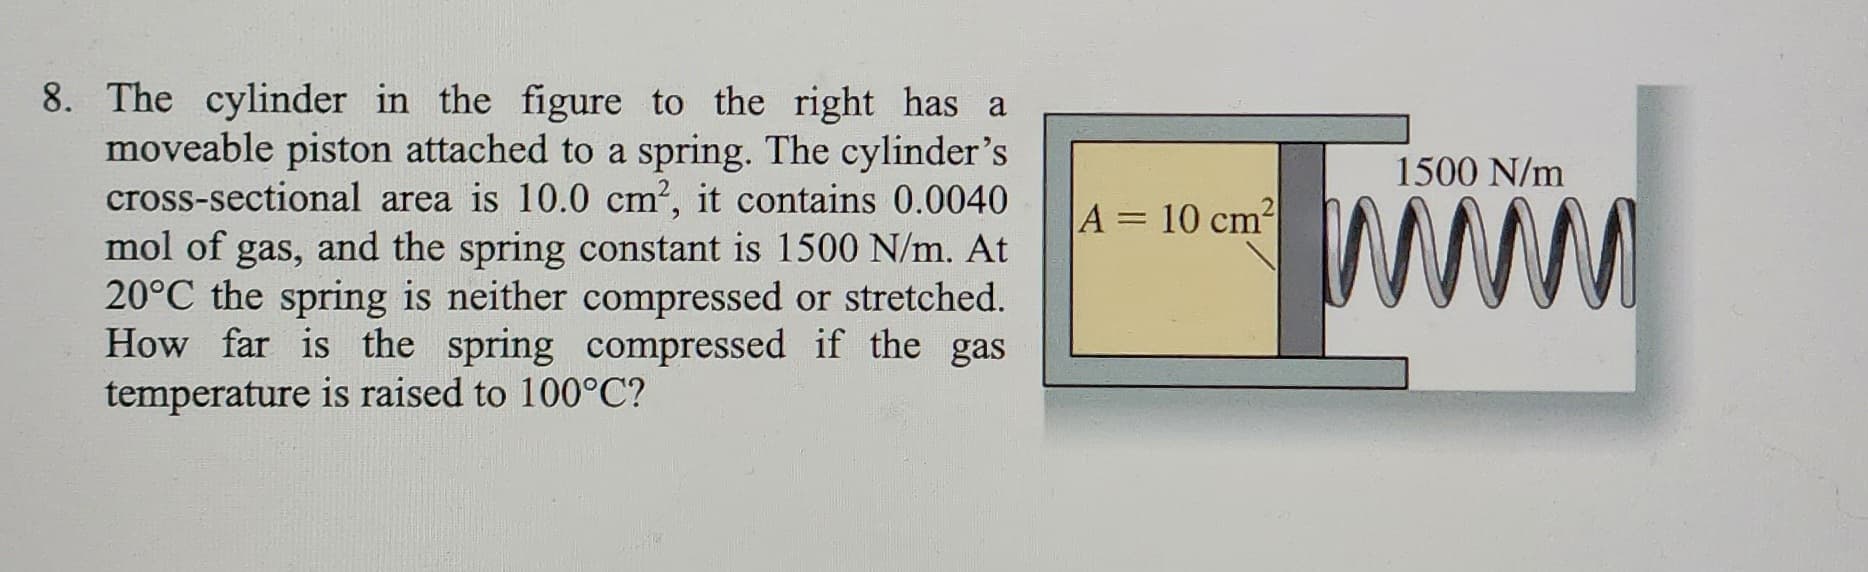 8. The cylinder in the figure to the right has a
moveable piston attached to a spring. The cylinder's
cross-sectional area is 10.0 cm², it contains 0.0040
mol of gas, and the spring constant is 1500 N/m. At
20°C the spring is neither compressed or stretched.
How far is the spring compressed if the gas
temperature is raised to 100°C?
1500 N/m
*****
M
A = 10 cm² 2